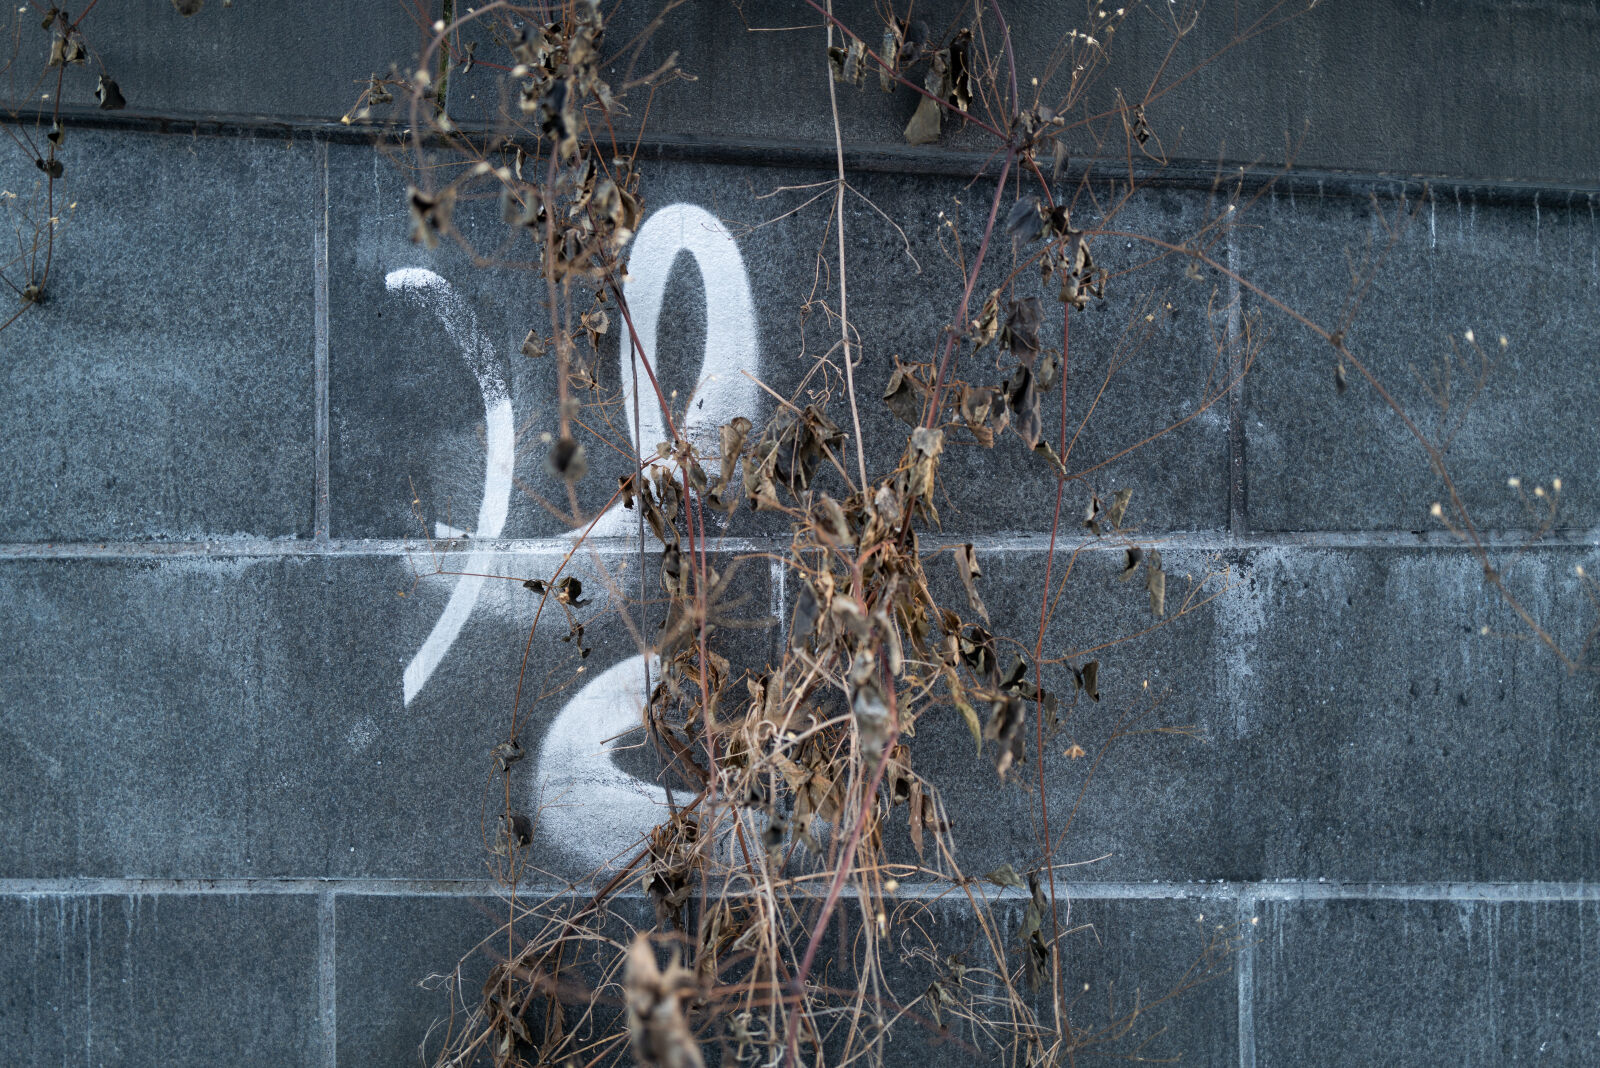 SUMMILUX 1:1.7/28 ASPH. sample photo. Decay of the last photography